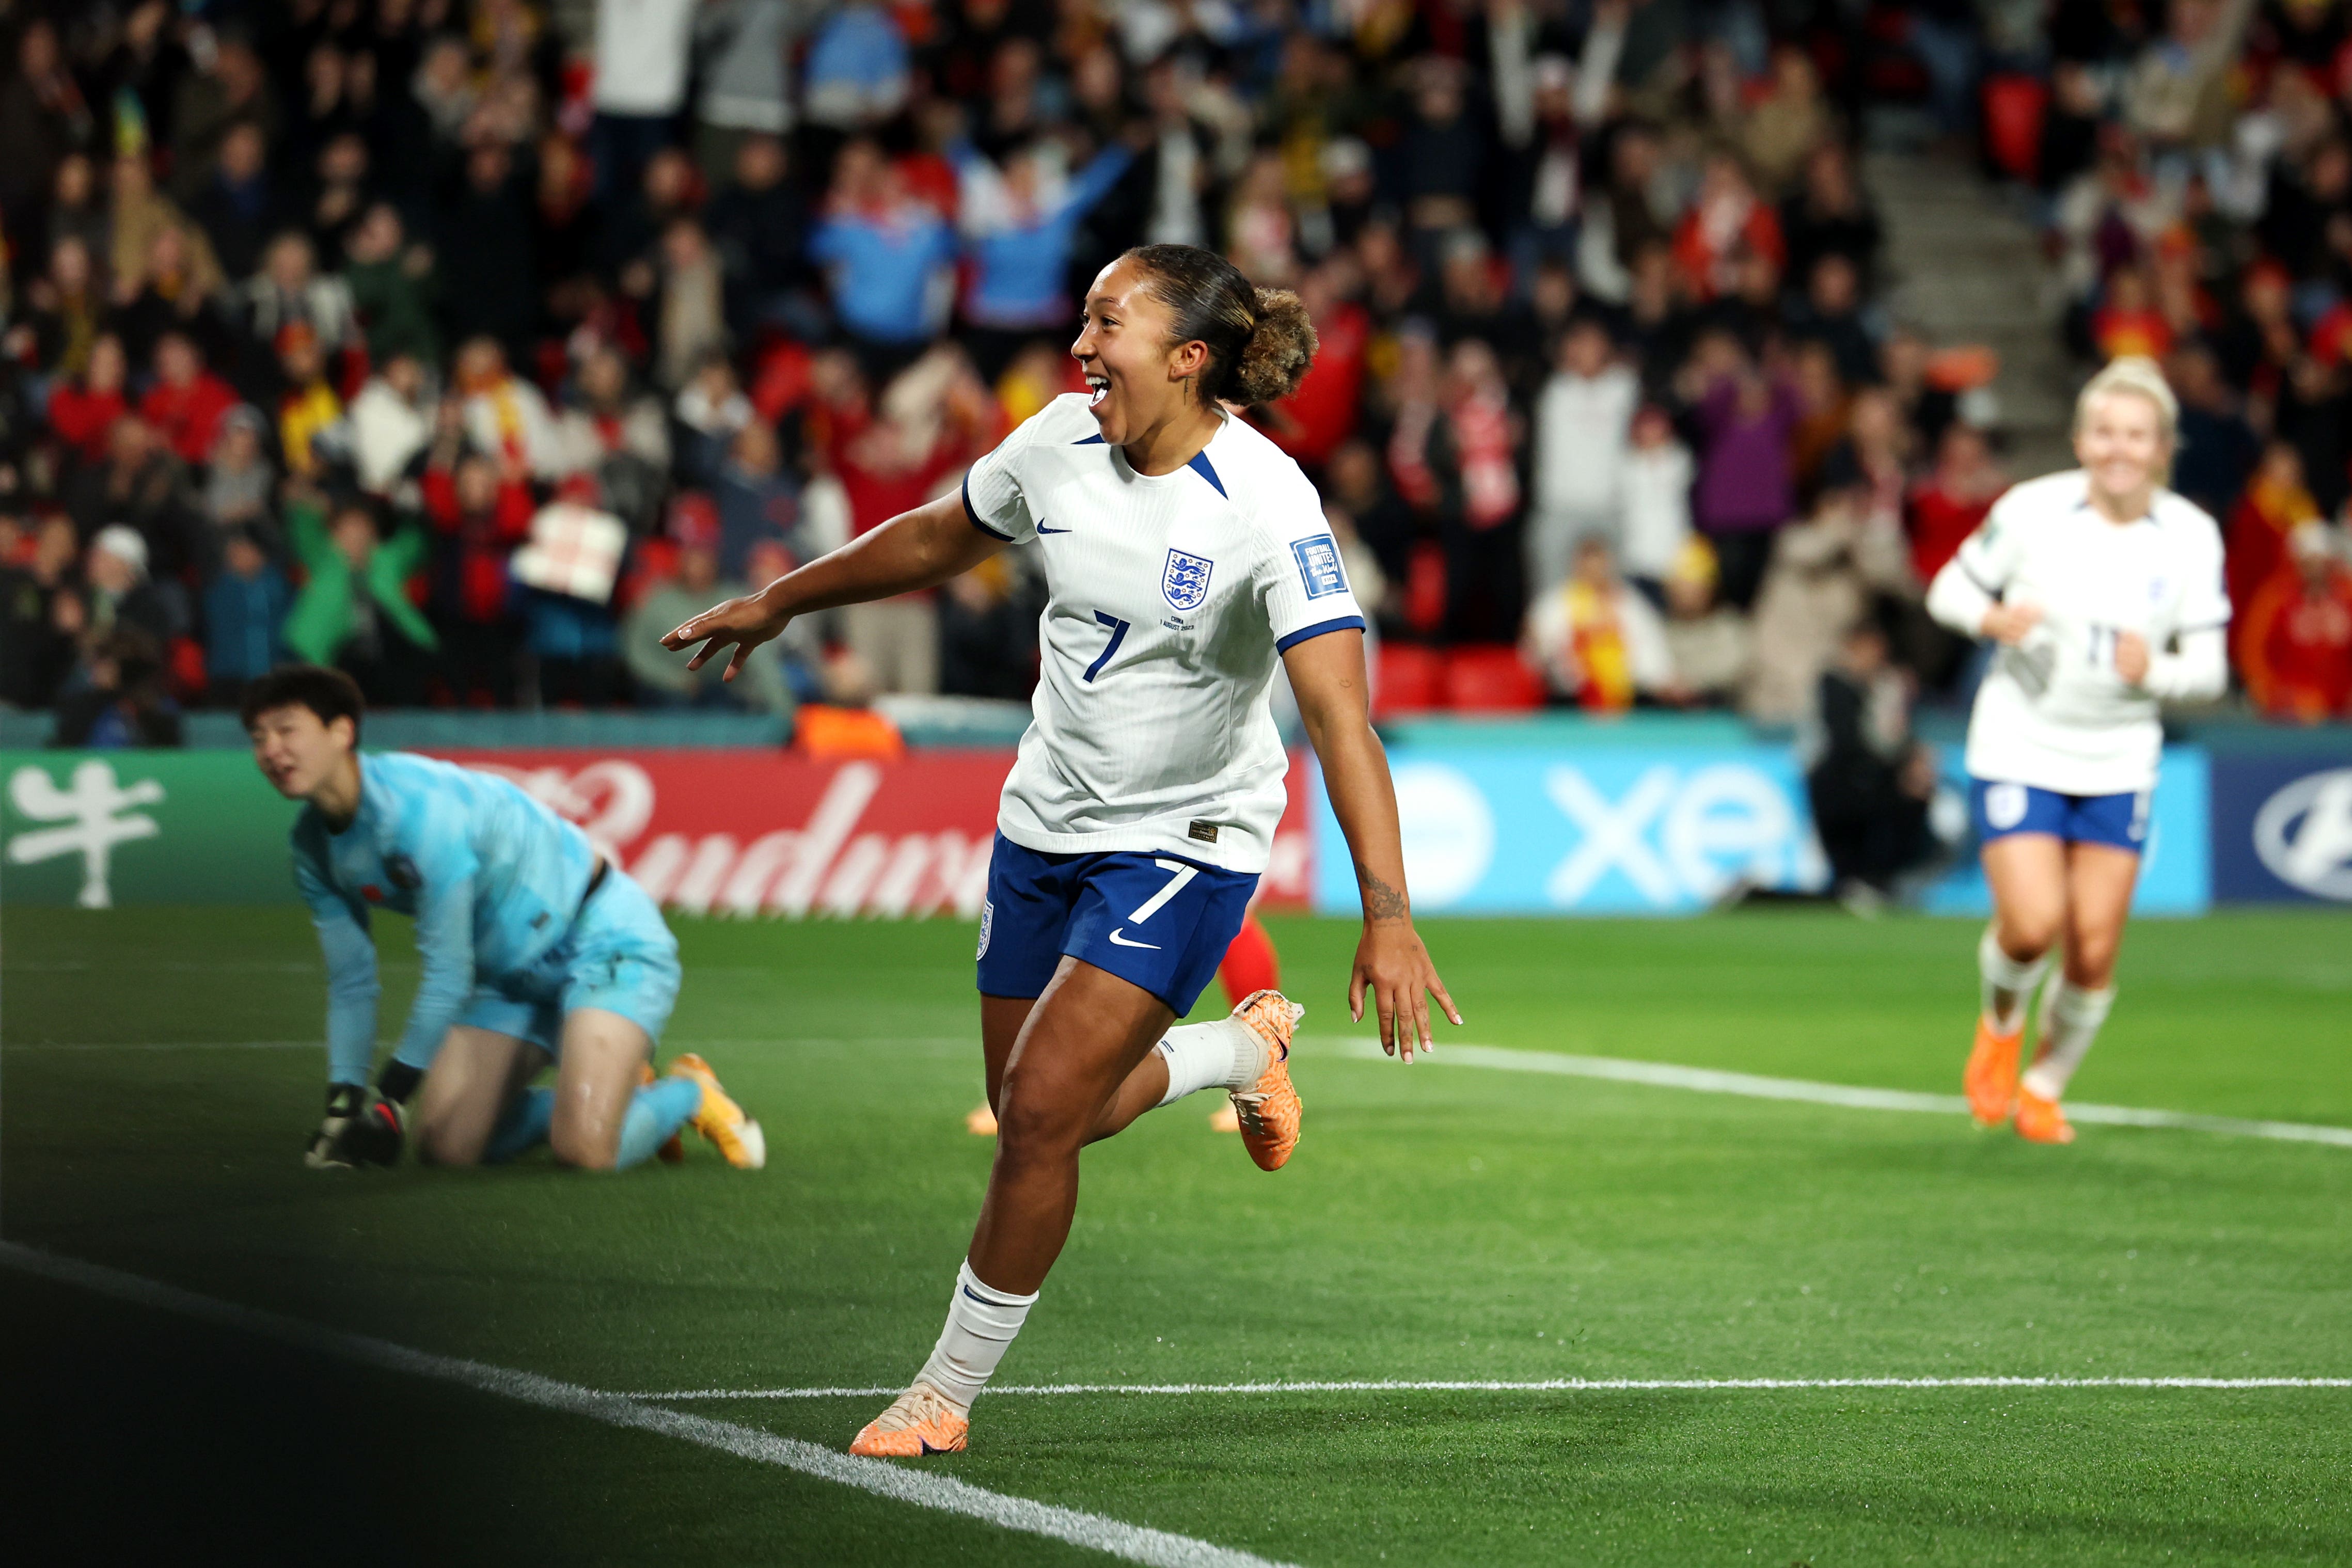 James lit up the World Cup before blotting her copybook with a stamp during the round of 16